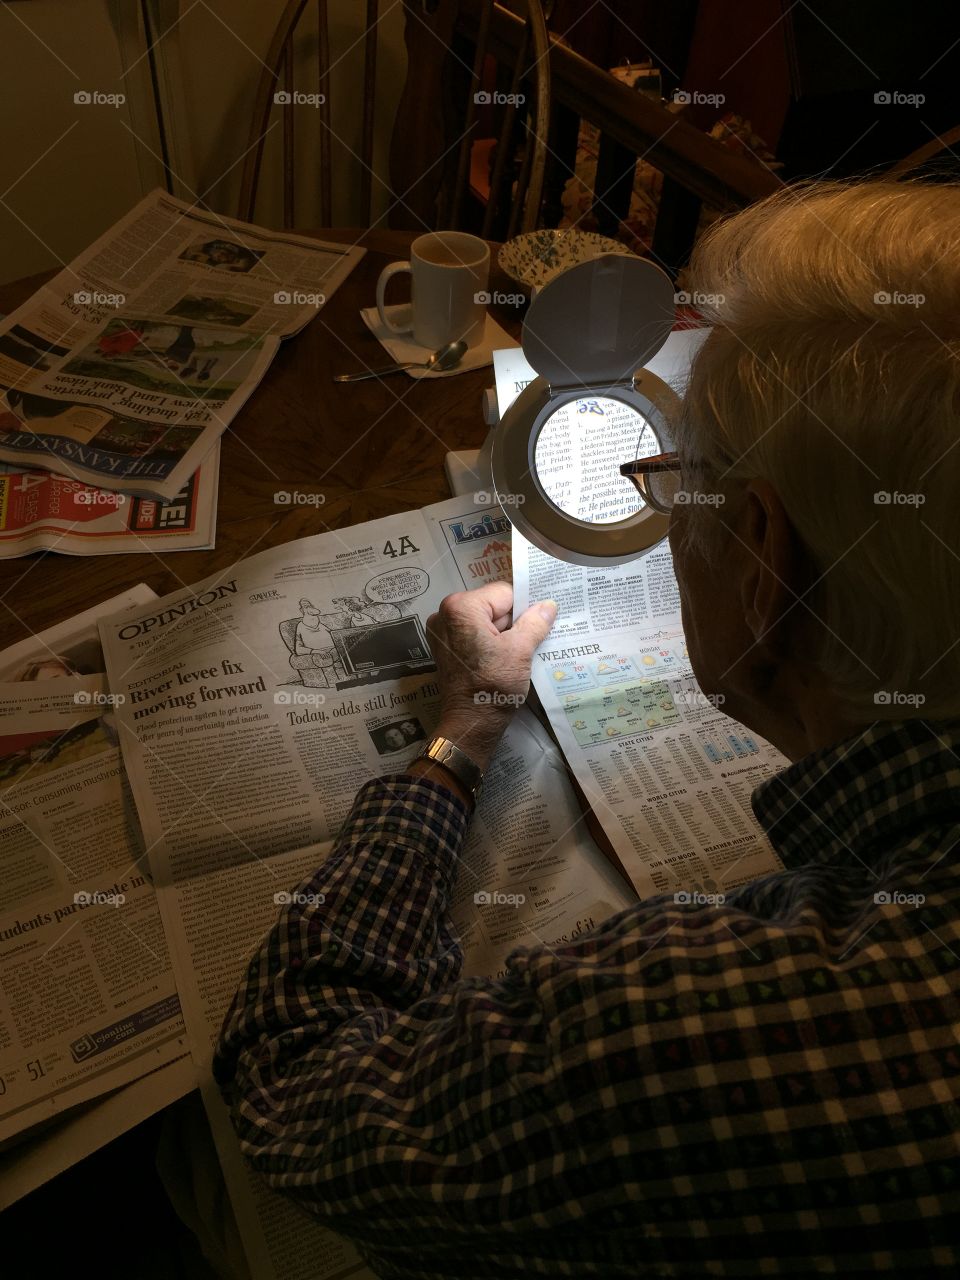 Elderly senior citizen male using lighted electronic magnifying glass gadget to read newspaper print while seated at kitchen table.